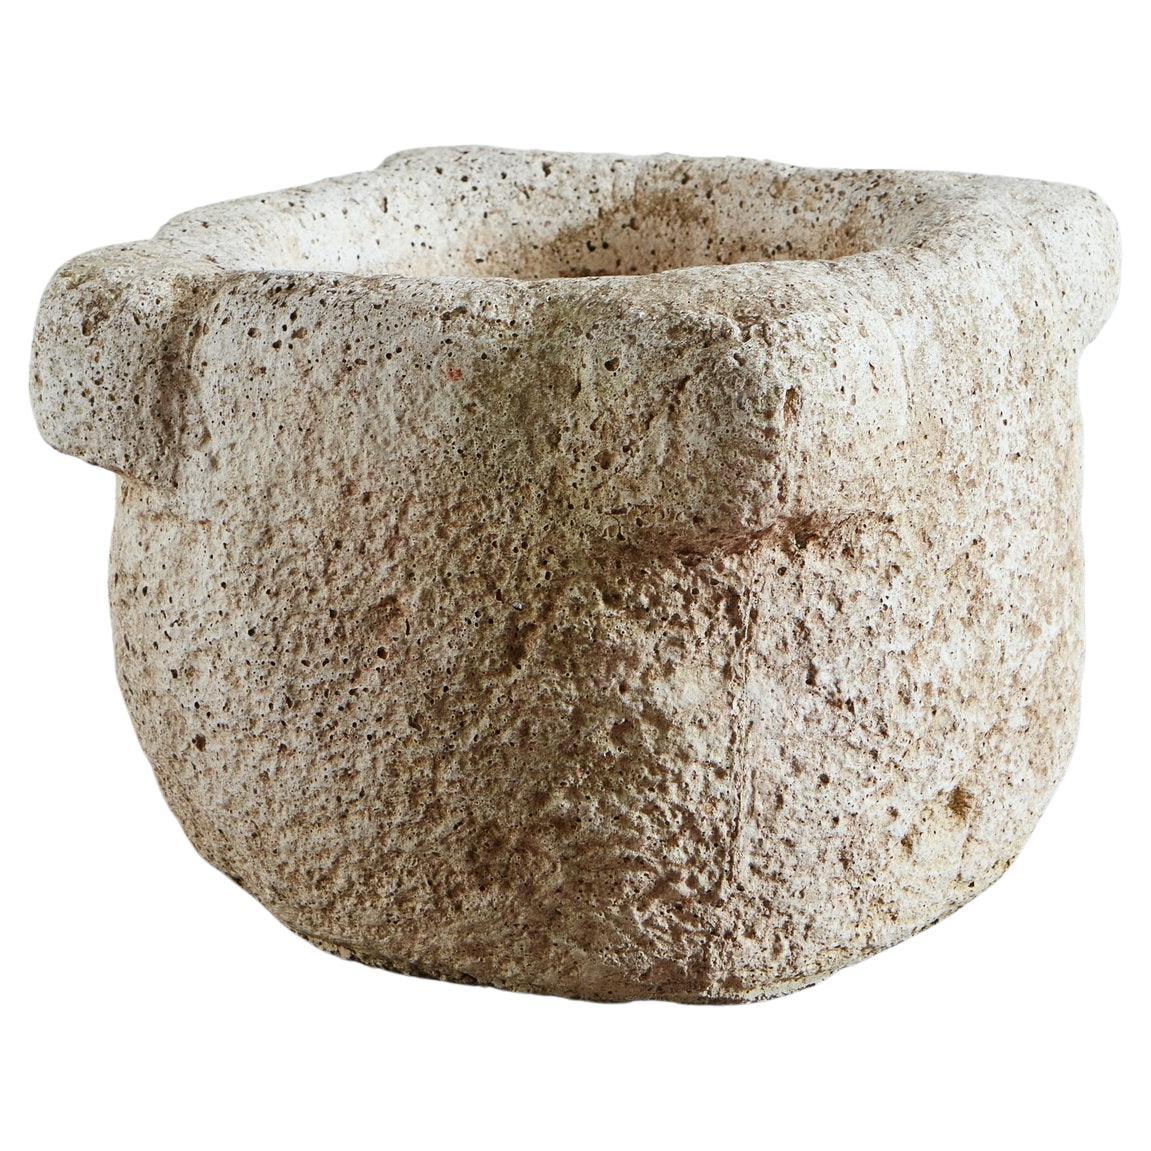 Stone Mortars, France 1940s - 2 Available For Sale